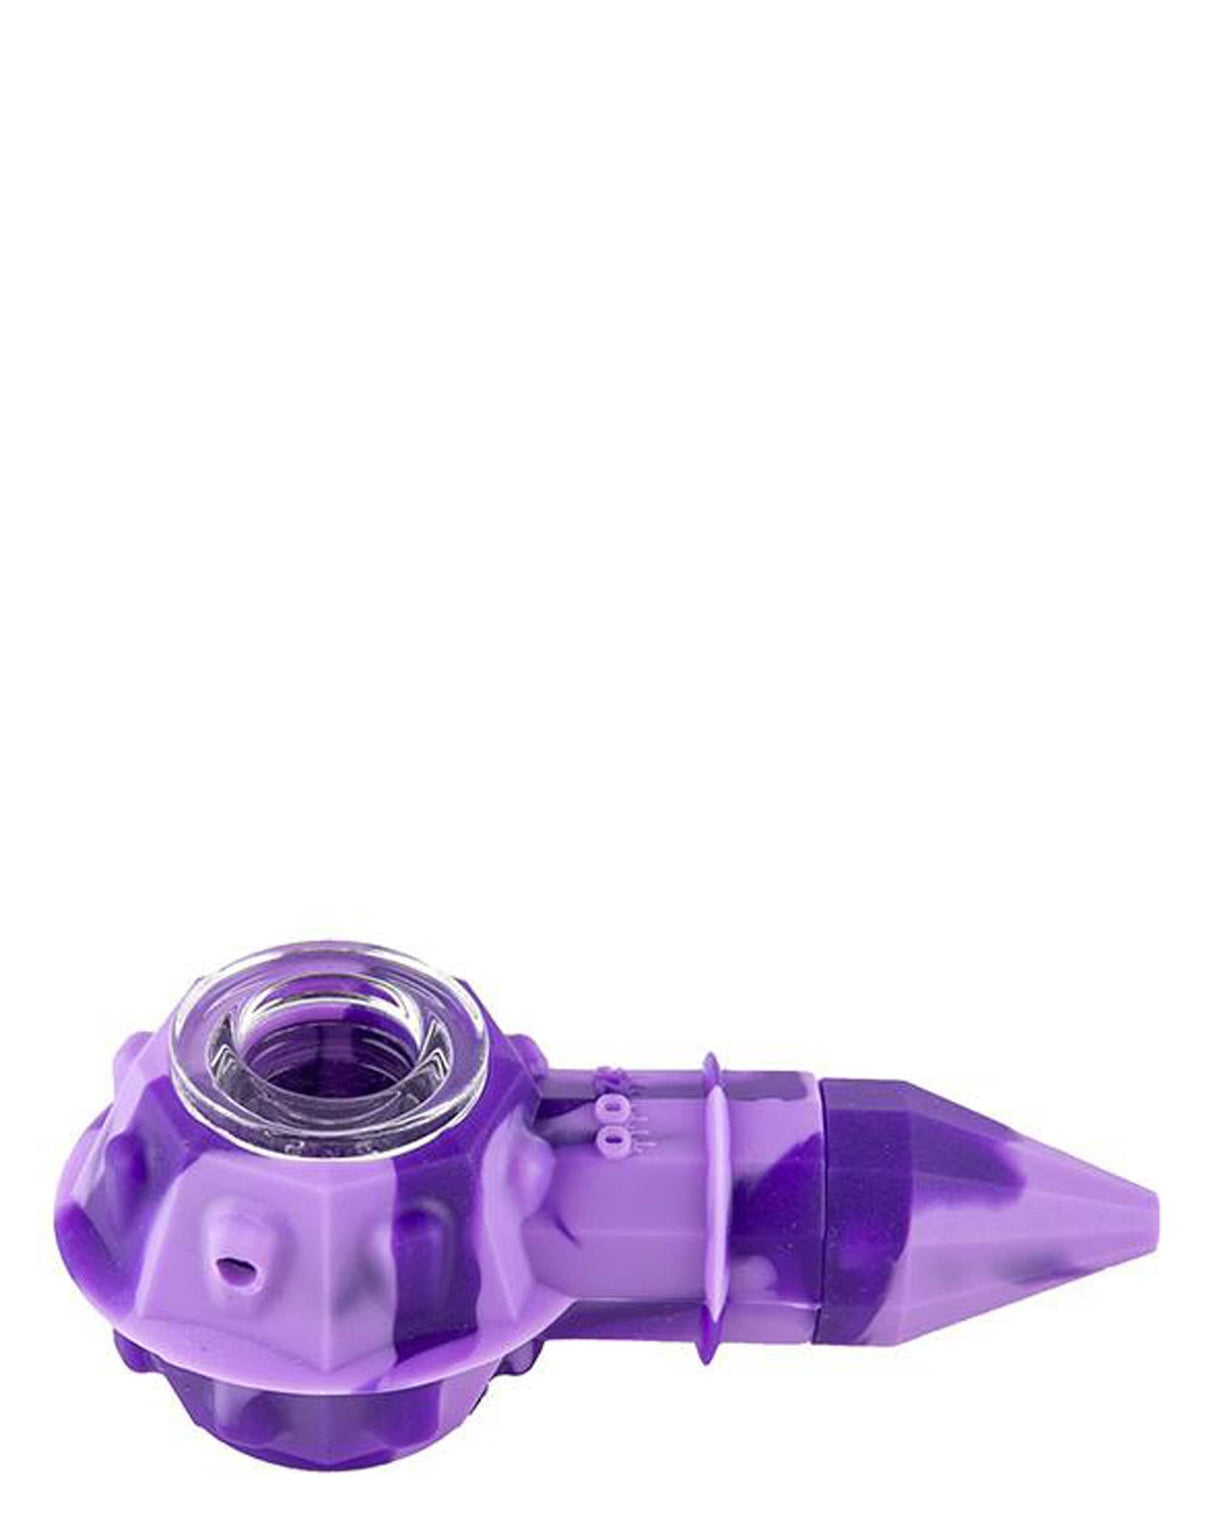 Ooze Bowser Silicone Pipe in Purple, Angled Side View with Quartz Bowl for Dry Herbs